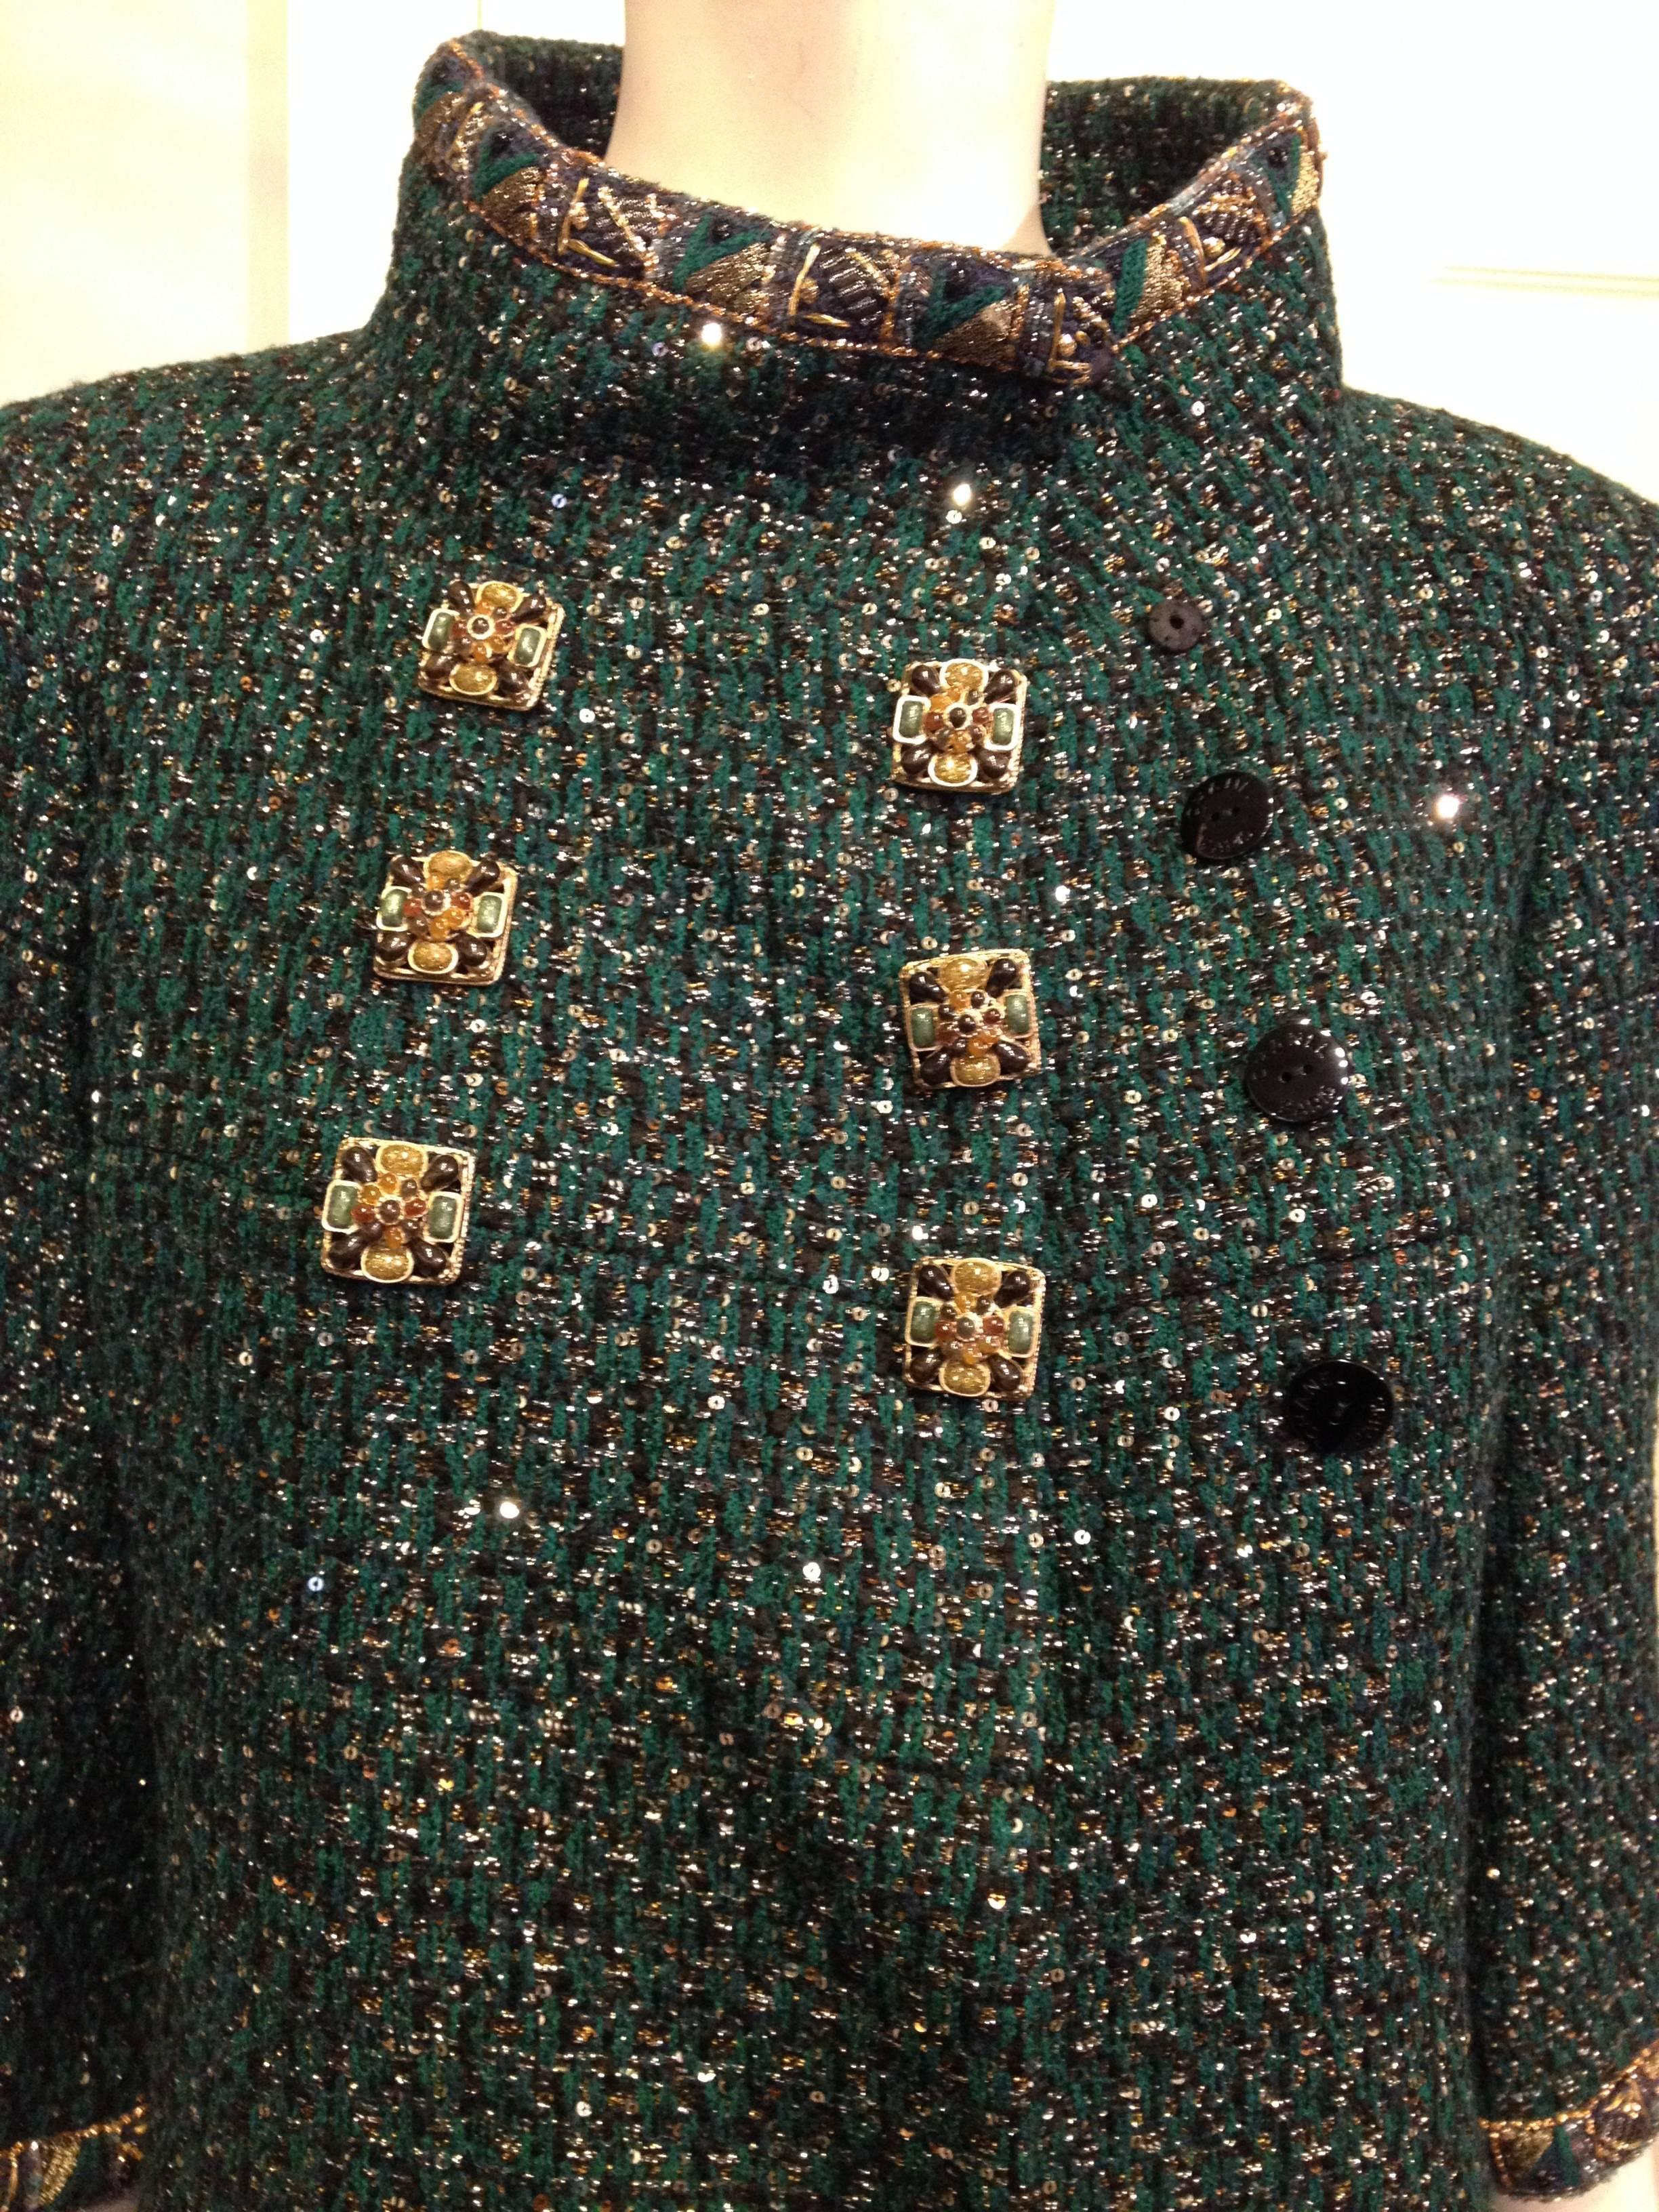 Chanel Dark Green Jacket with Gold Buttons Size 34 (2) 2